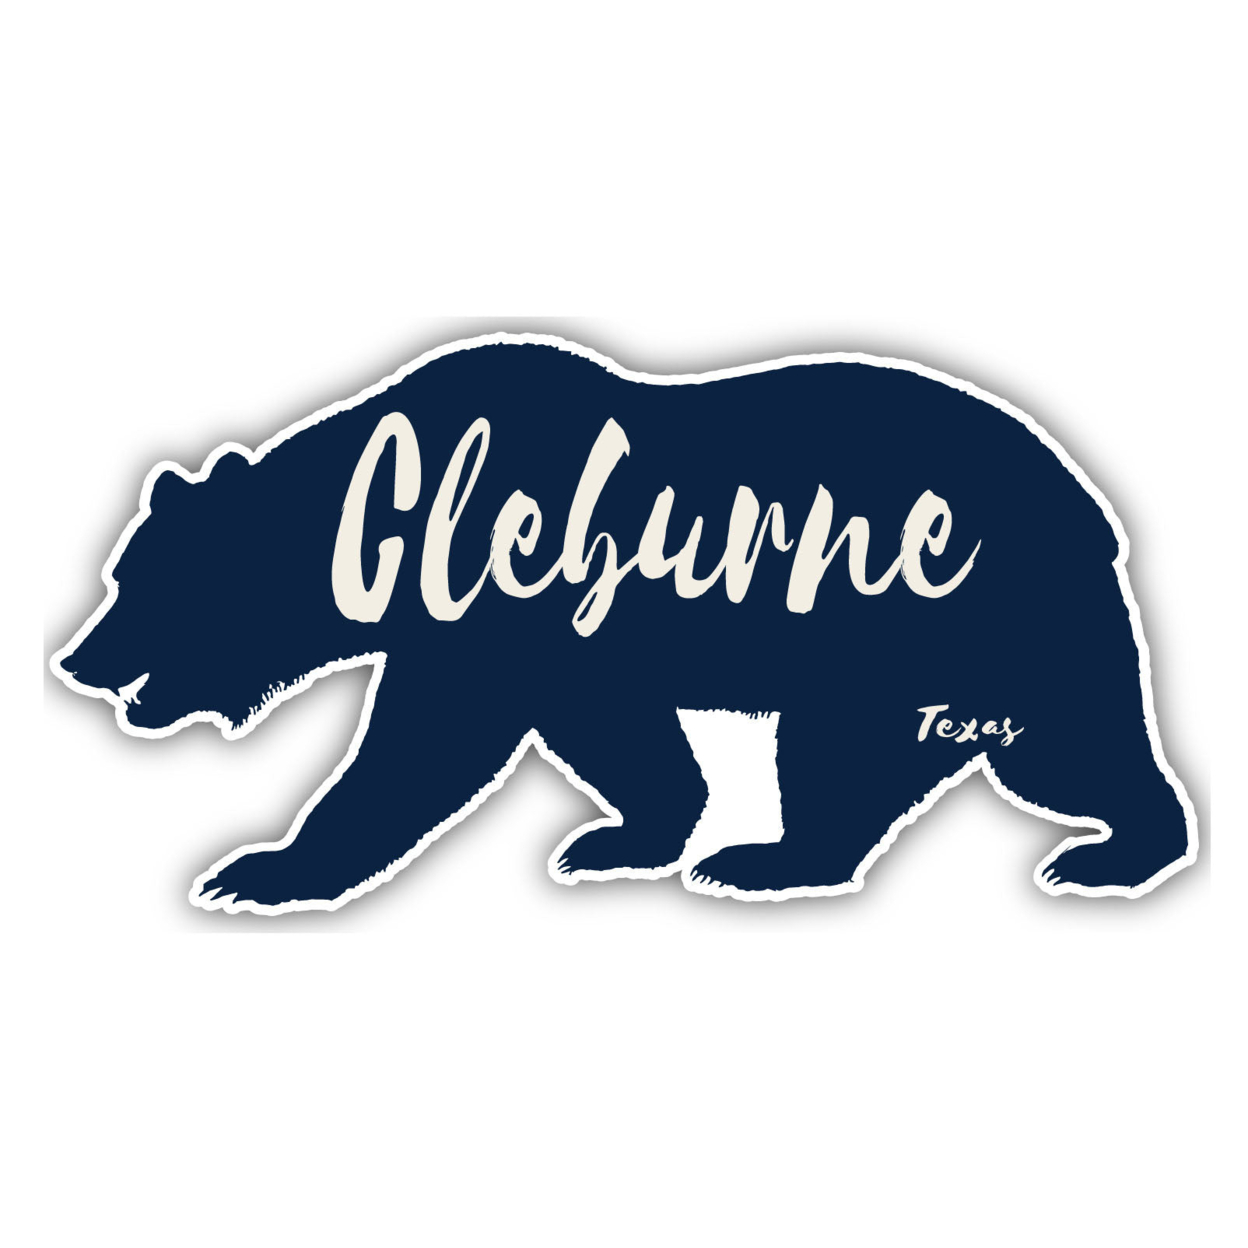 Cleburne Texas Souvenir Decorative Stickers (Choose Theme And Size) - 4-Pack, 8-Inch, Bear